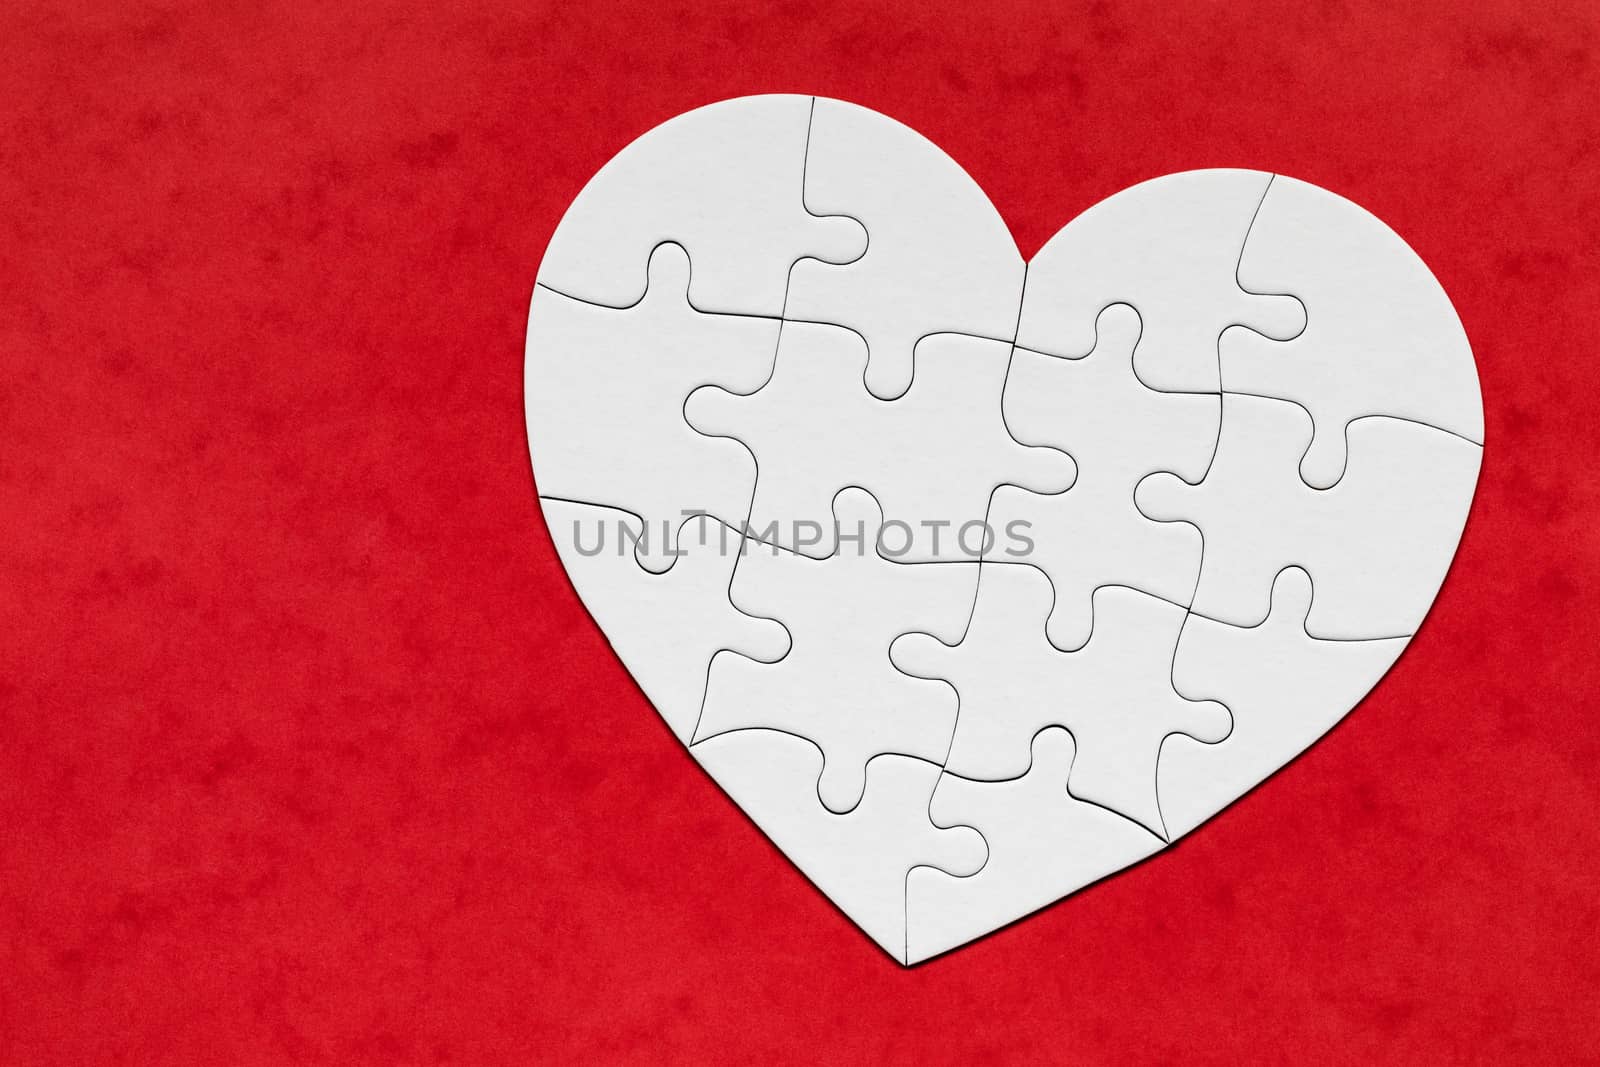 Heart object made of puzzle pieces. Make complete heart. Jigsaw puzzle pieces in form of heart. Happy Valentines Day, greeting card template. Heart jigsaw puzzle.